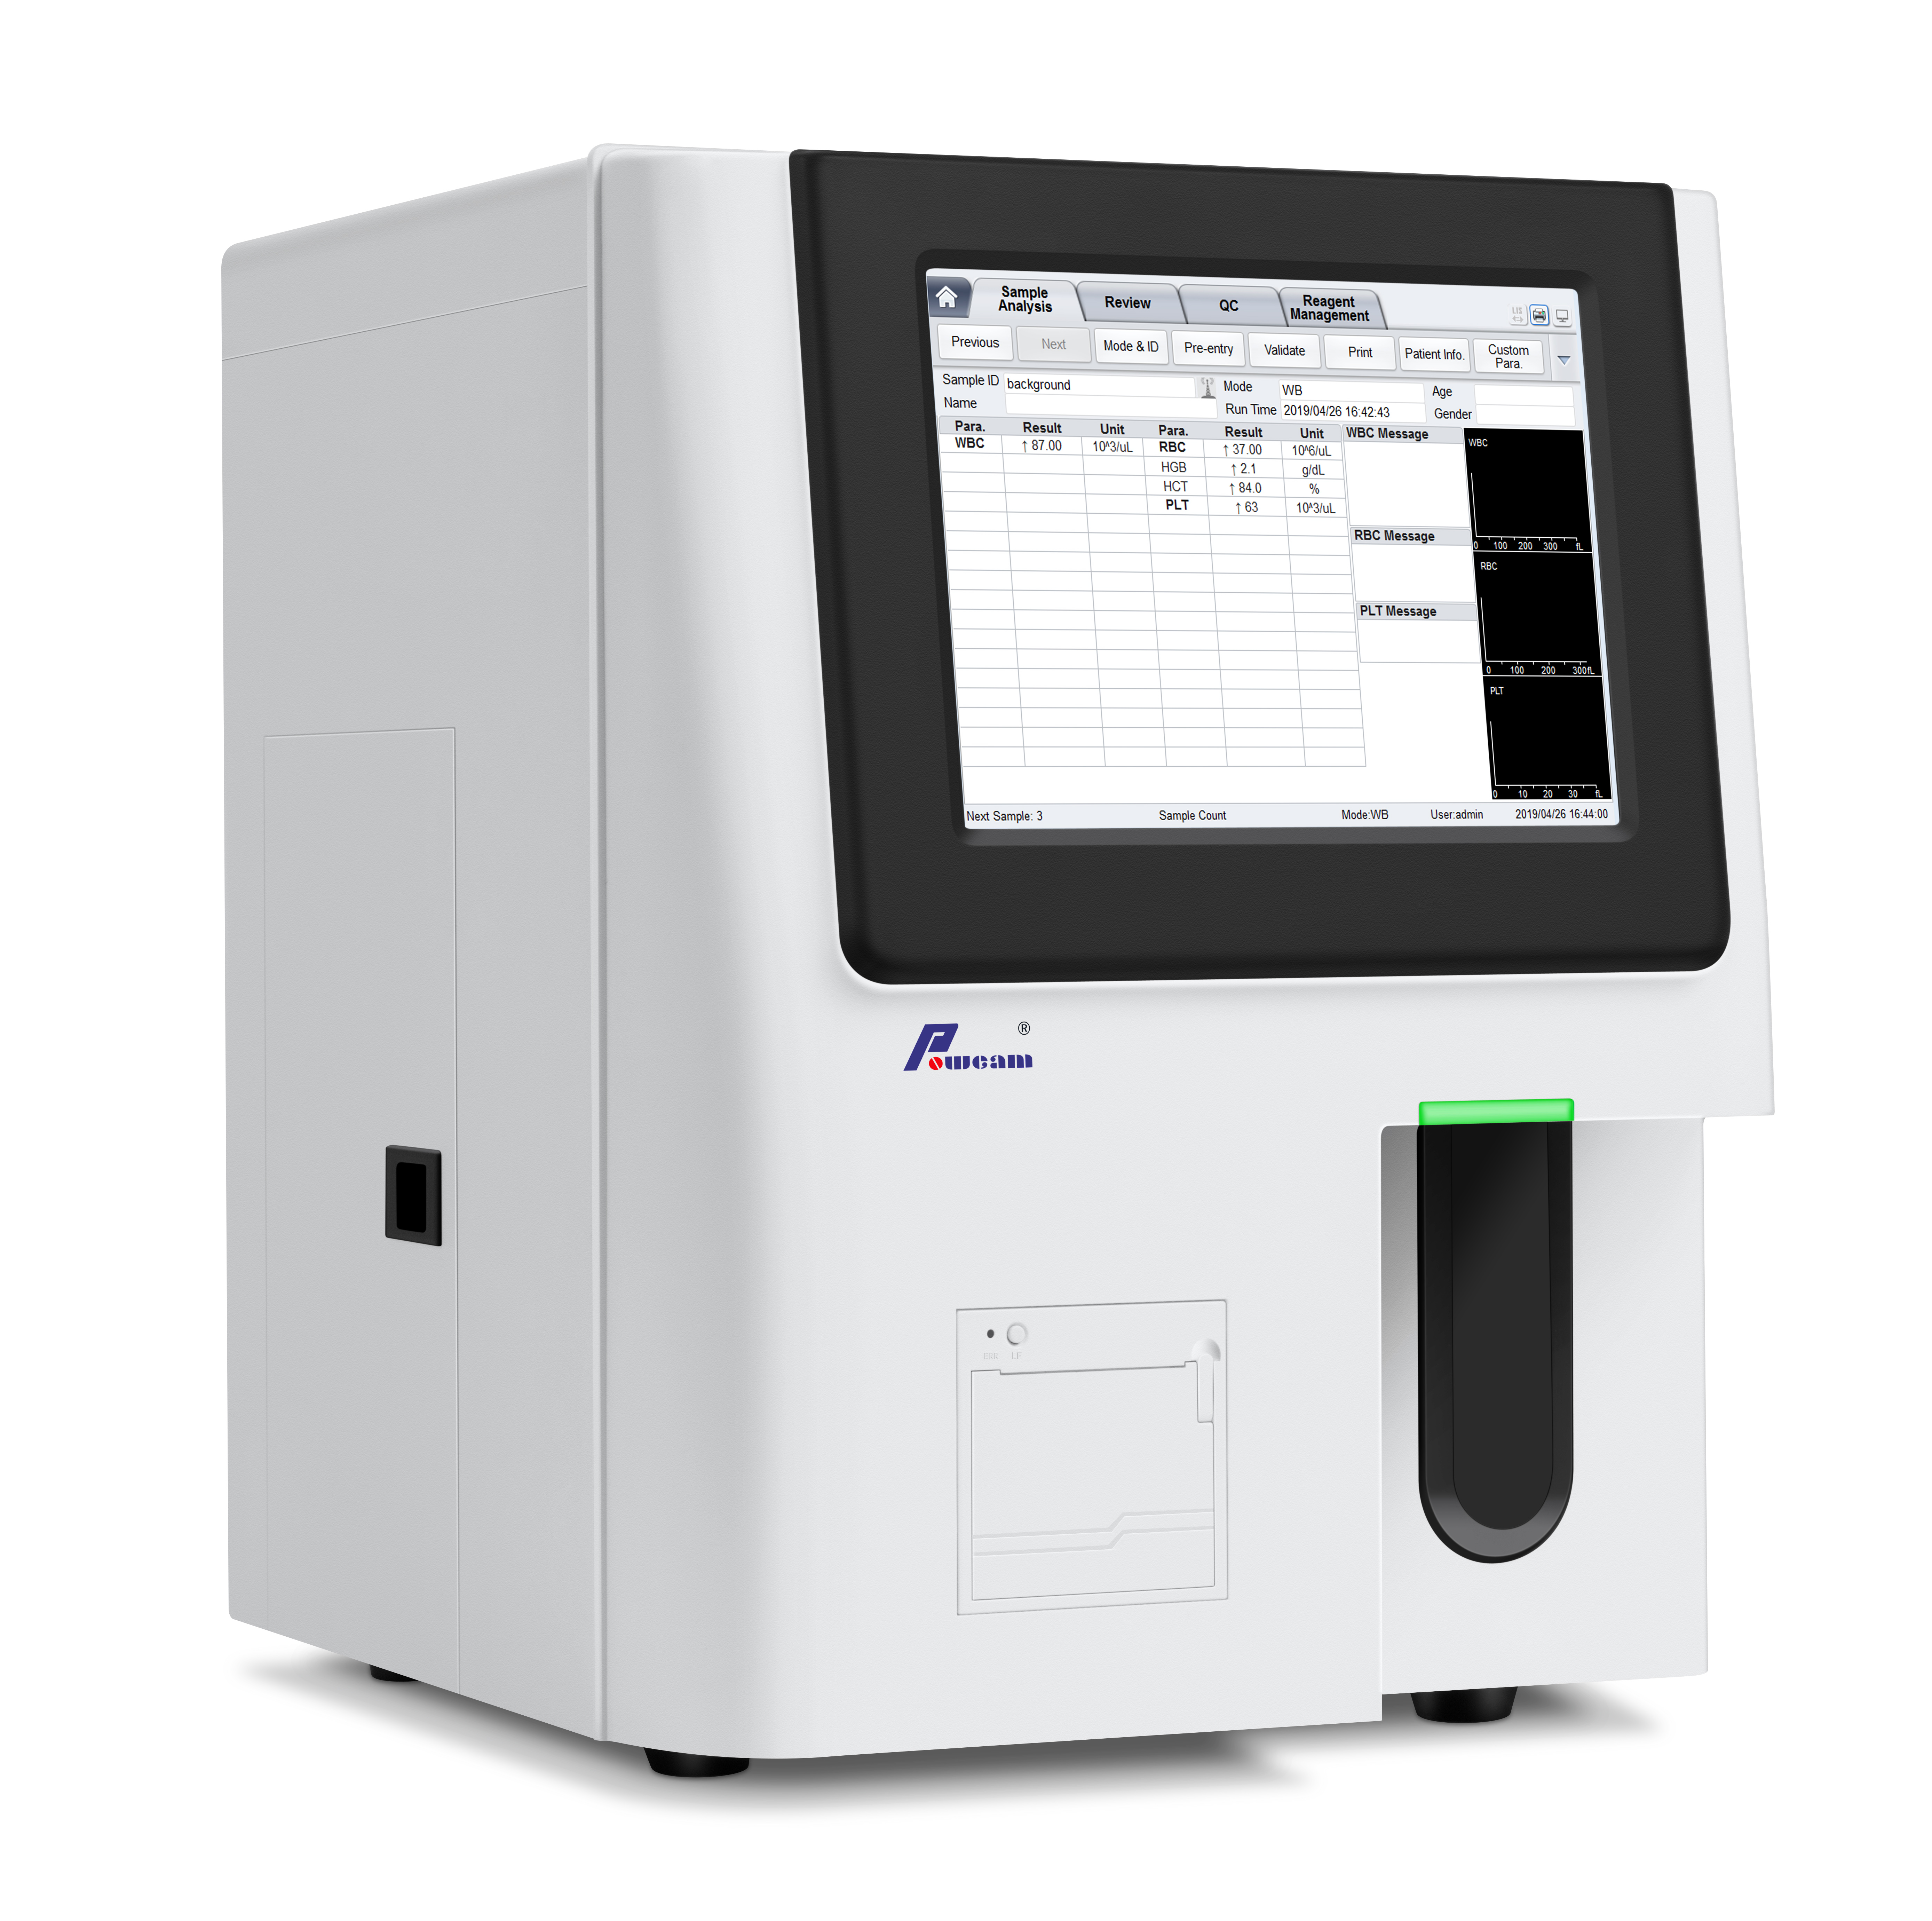 Automatic 3 Differential Haematology Blood Analyser Price